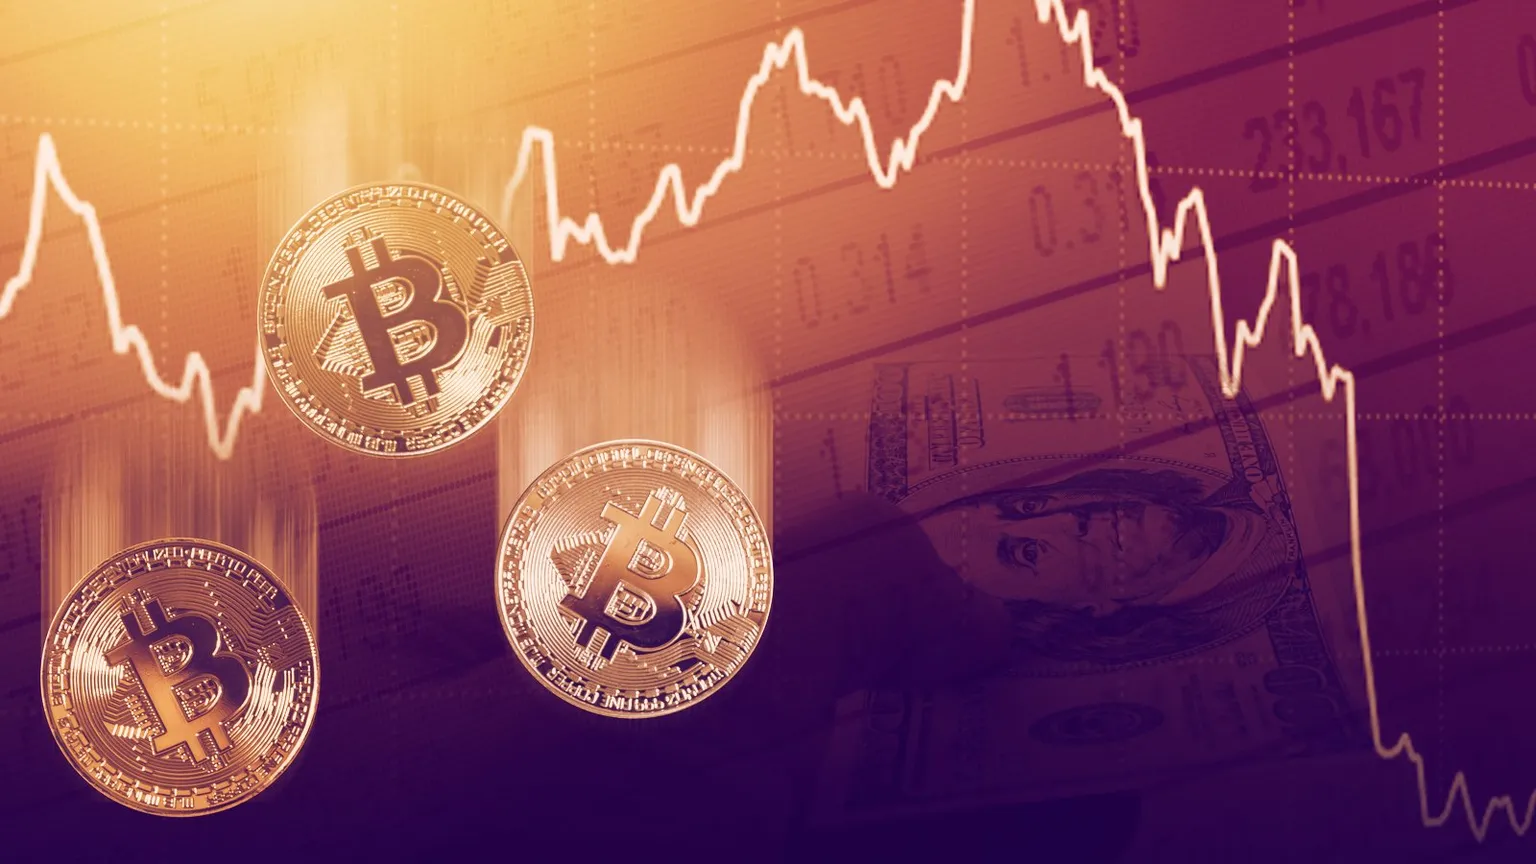 Bitcoin price falters 3 days before halving. Image: Shutterstock